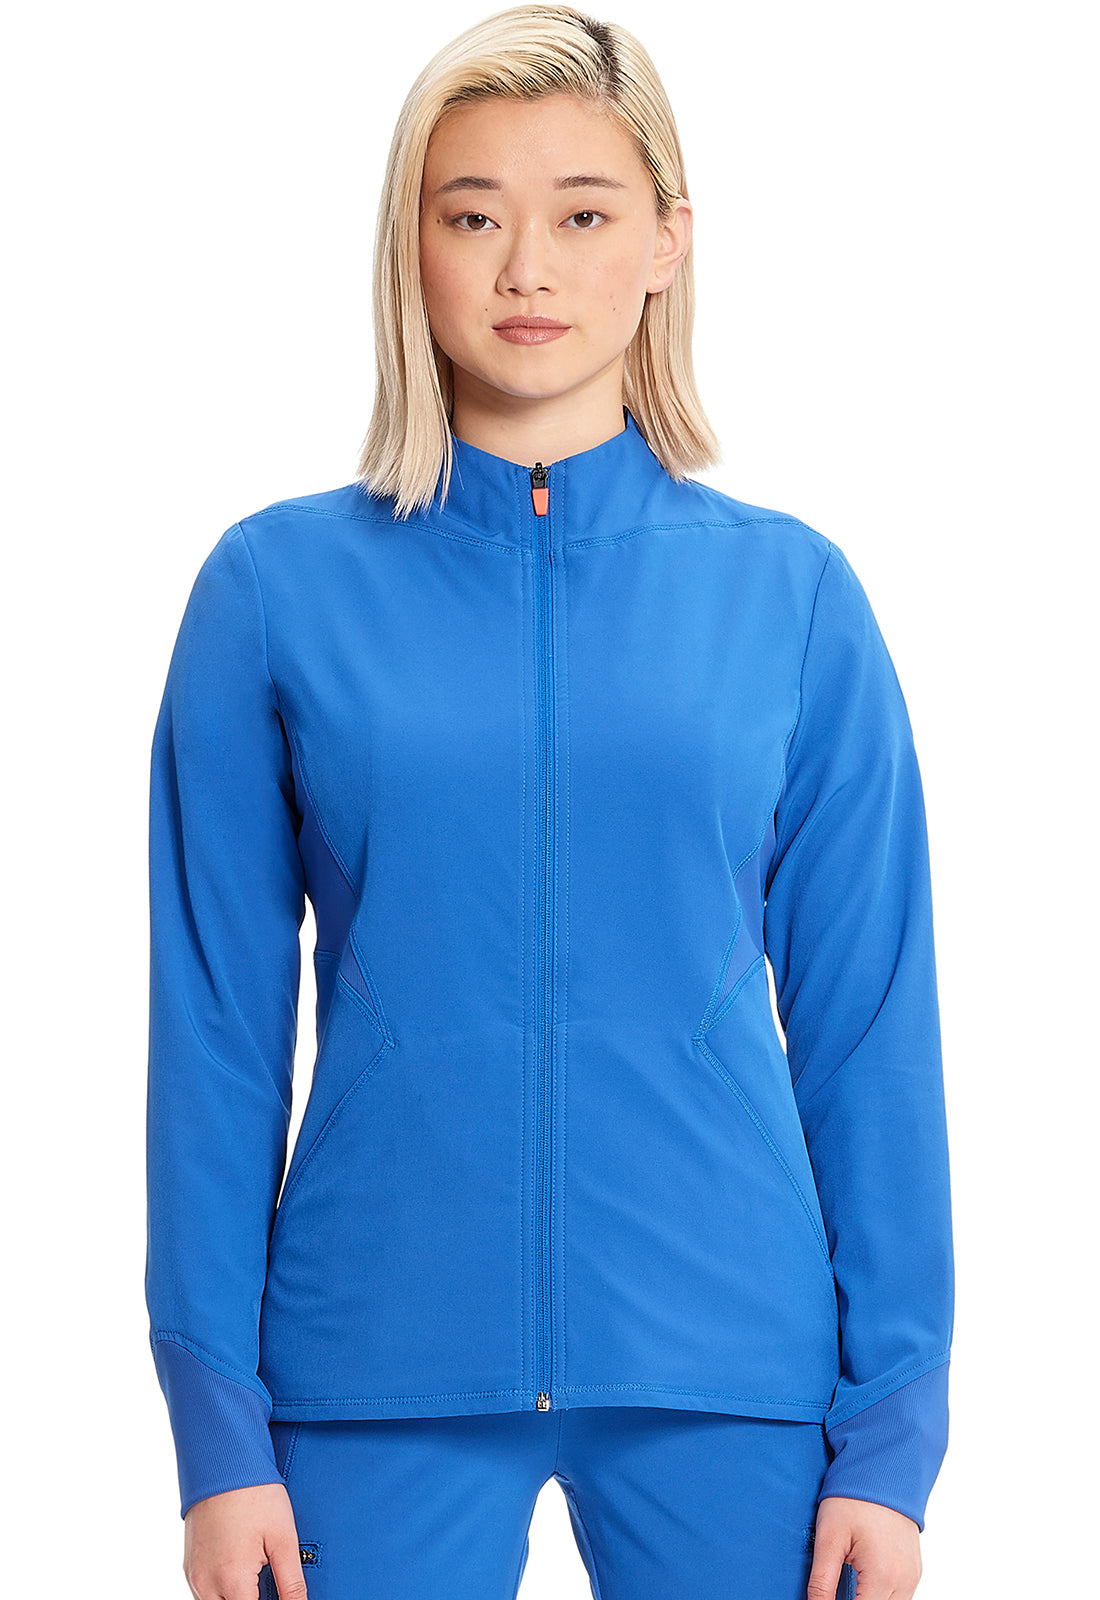 IN320A - Infinity GNR8 Zip Front Jacket